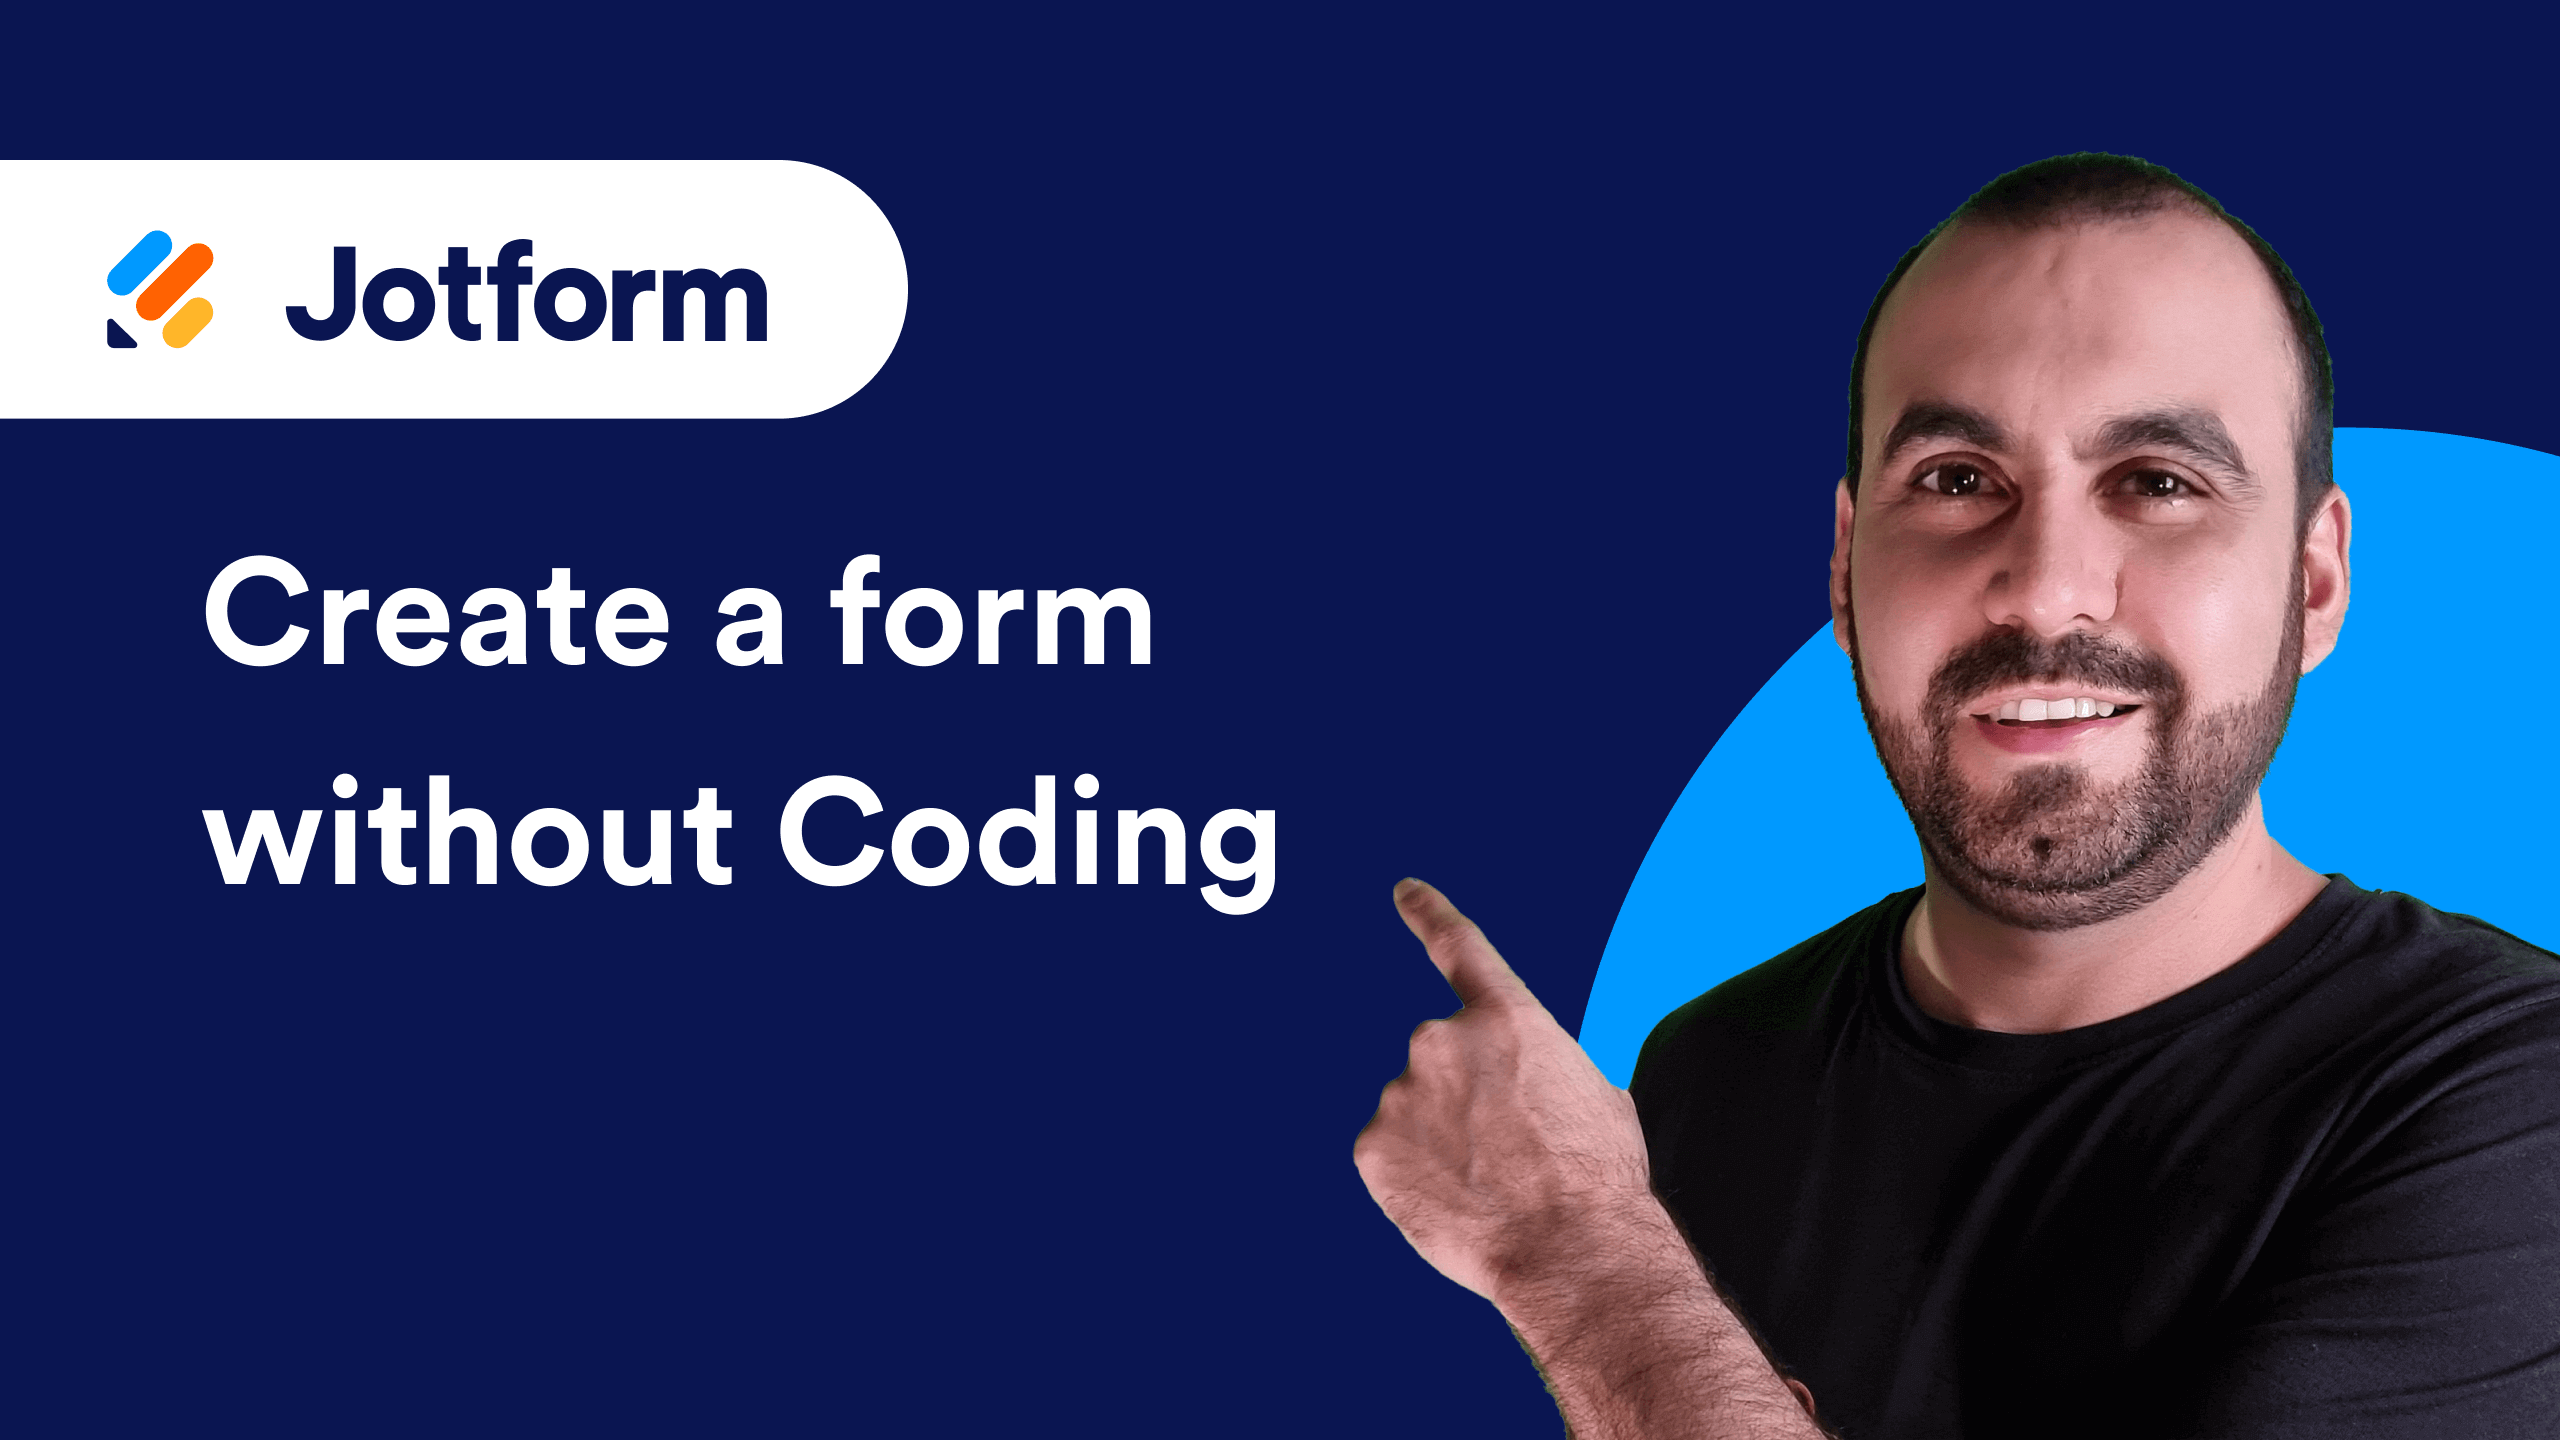 How to create a form without coding